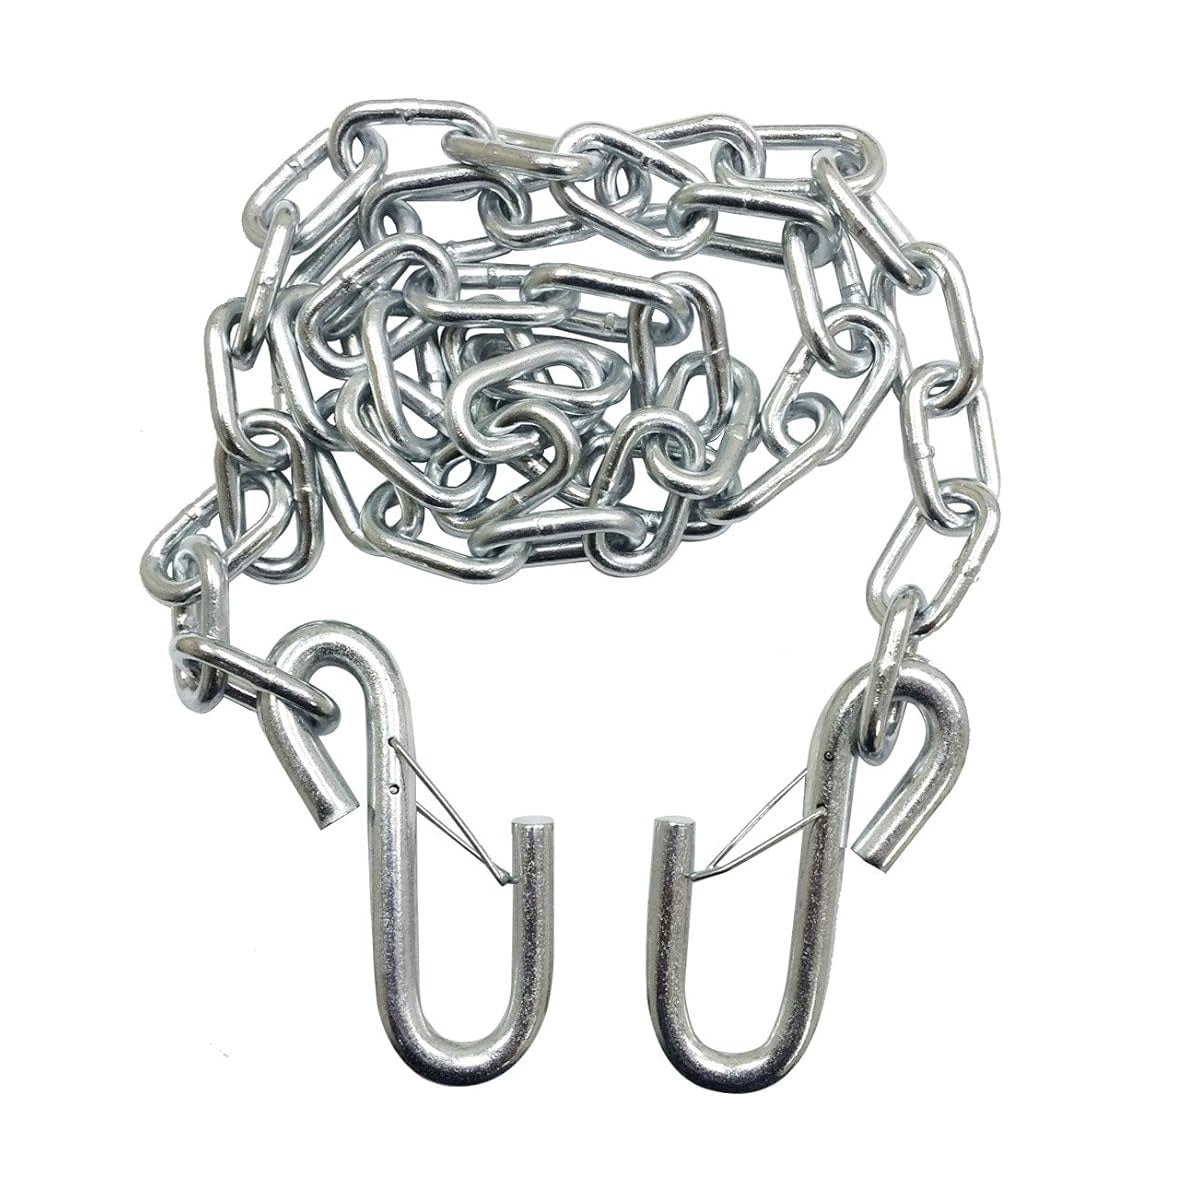 Safrty Chain For Trailer